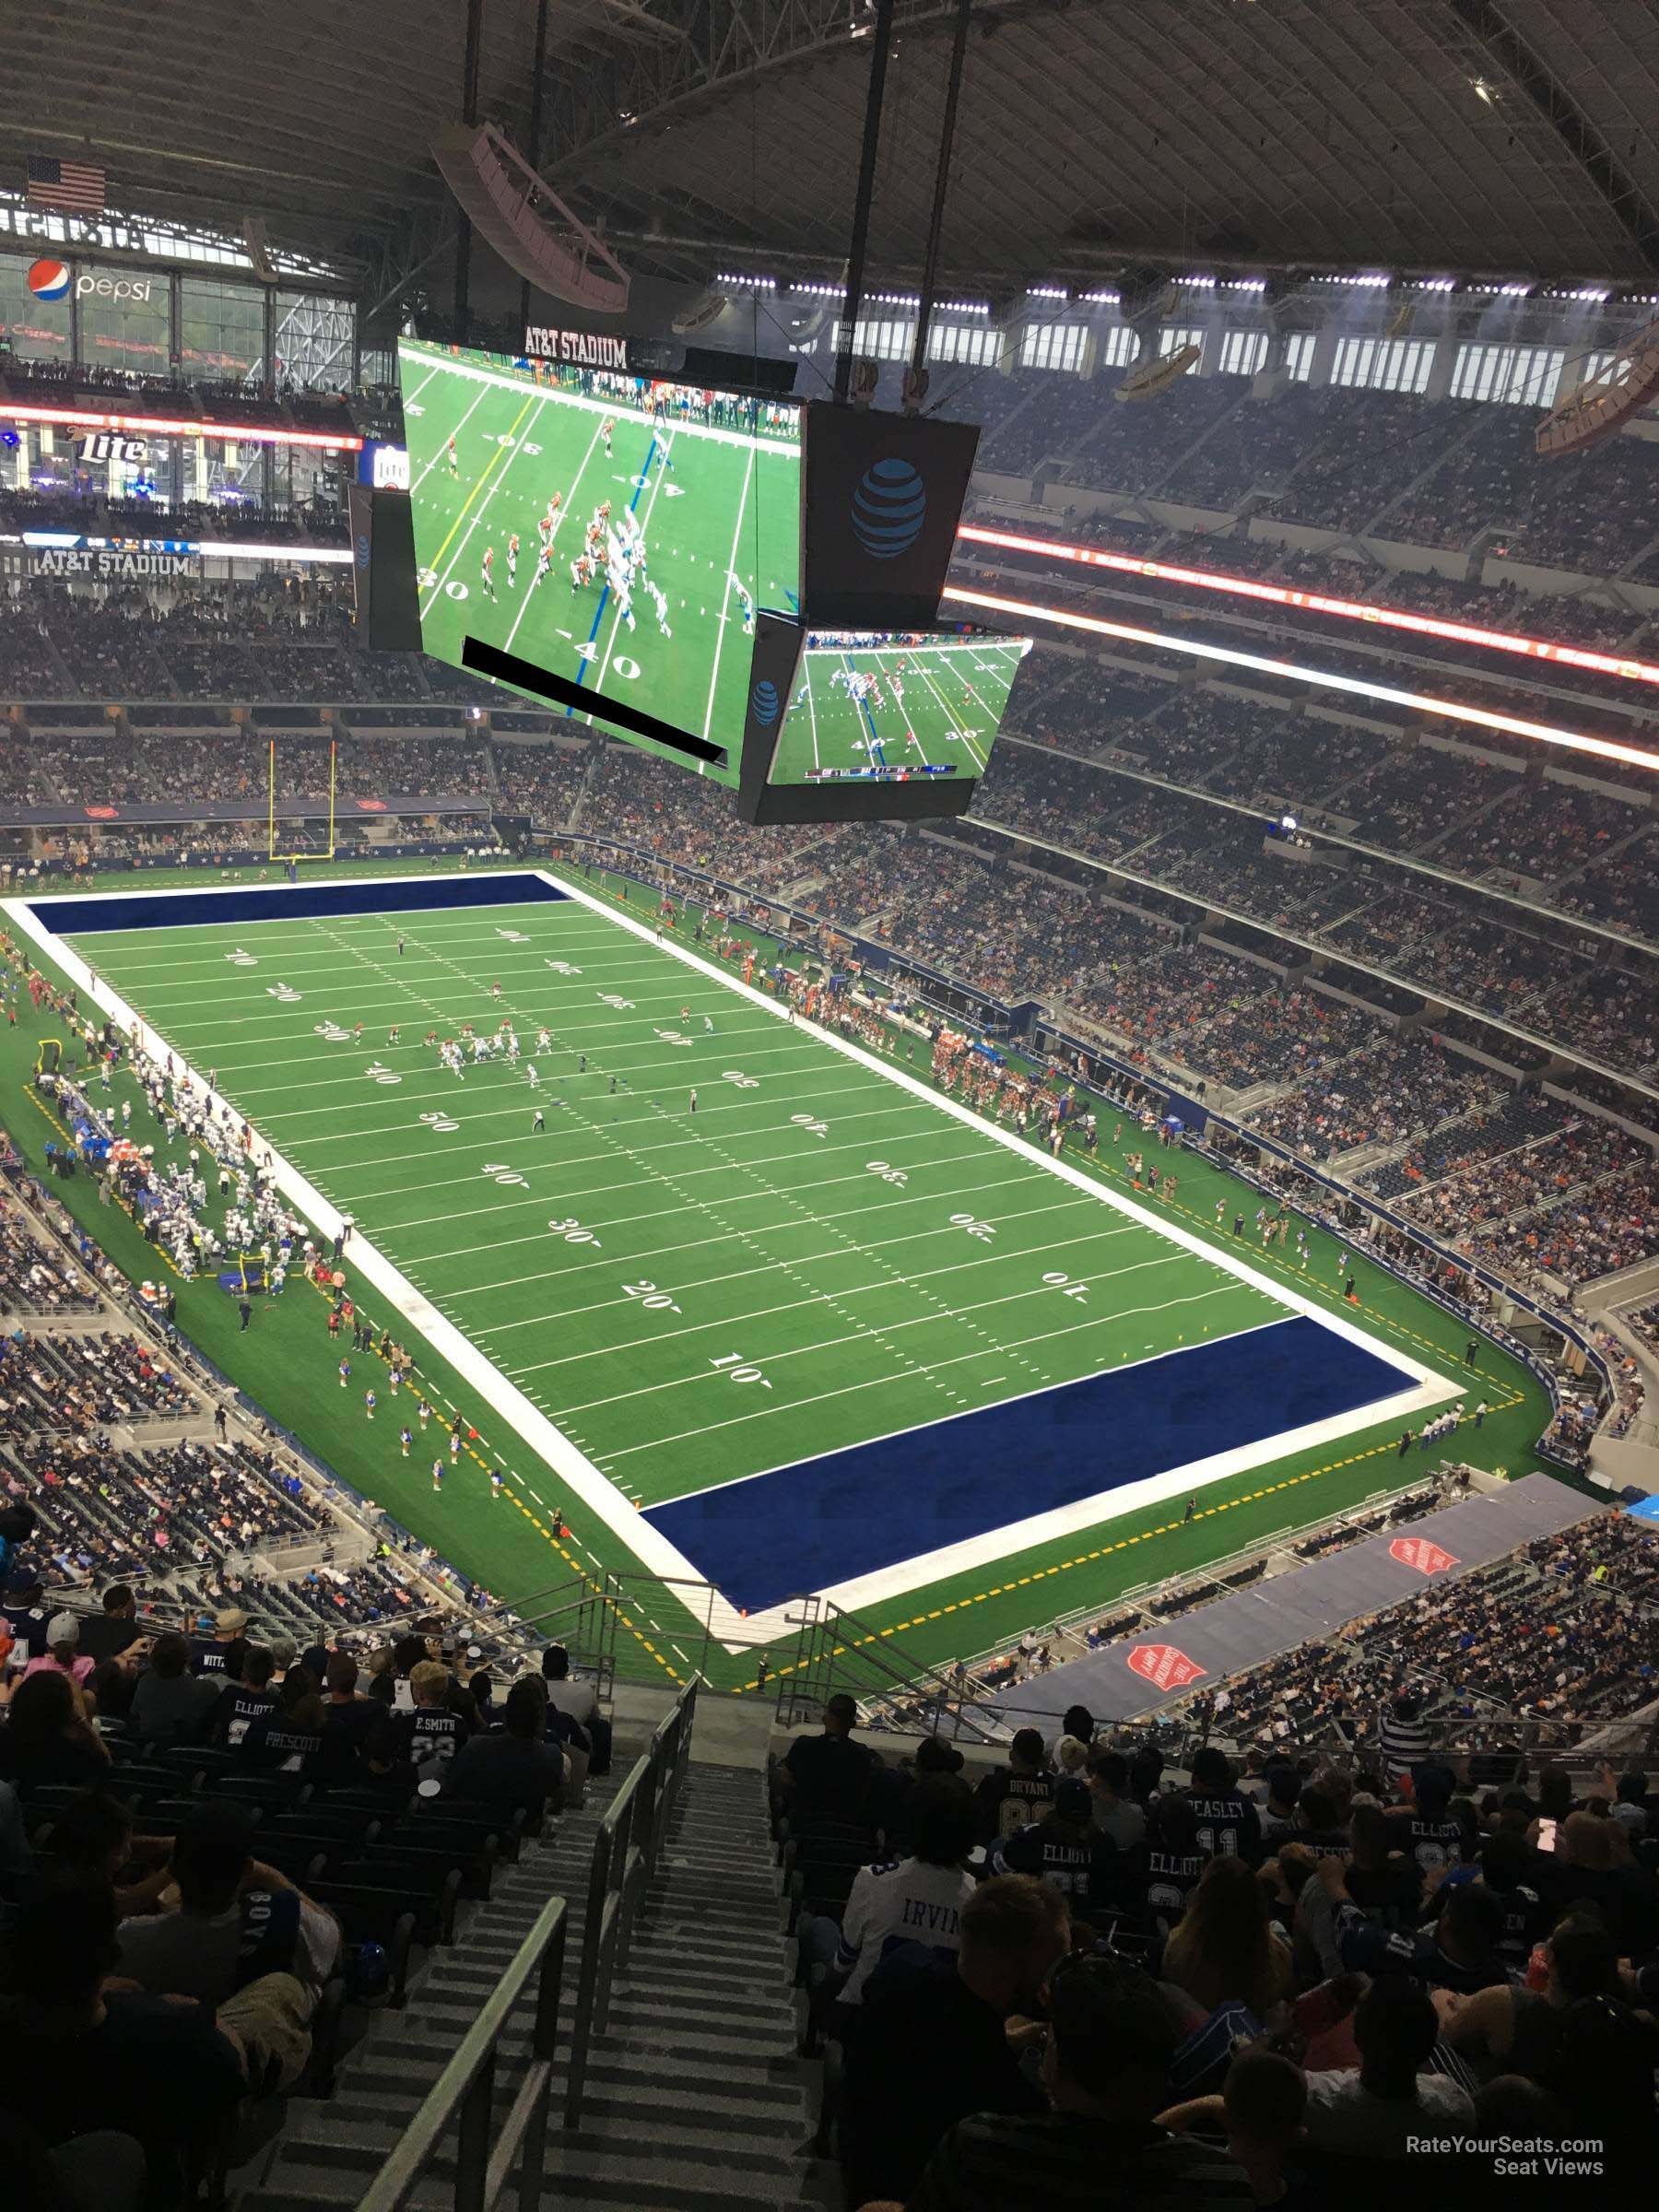 section 403, row 22 seat view  for football - at&t stadium (cowboys stadium)